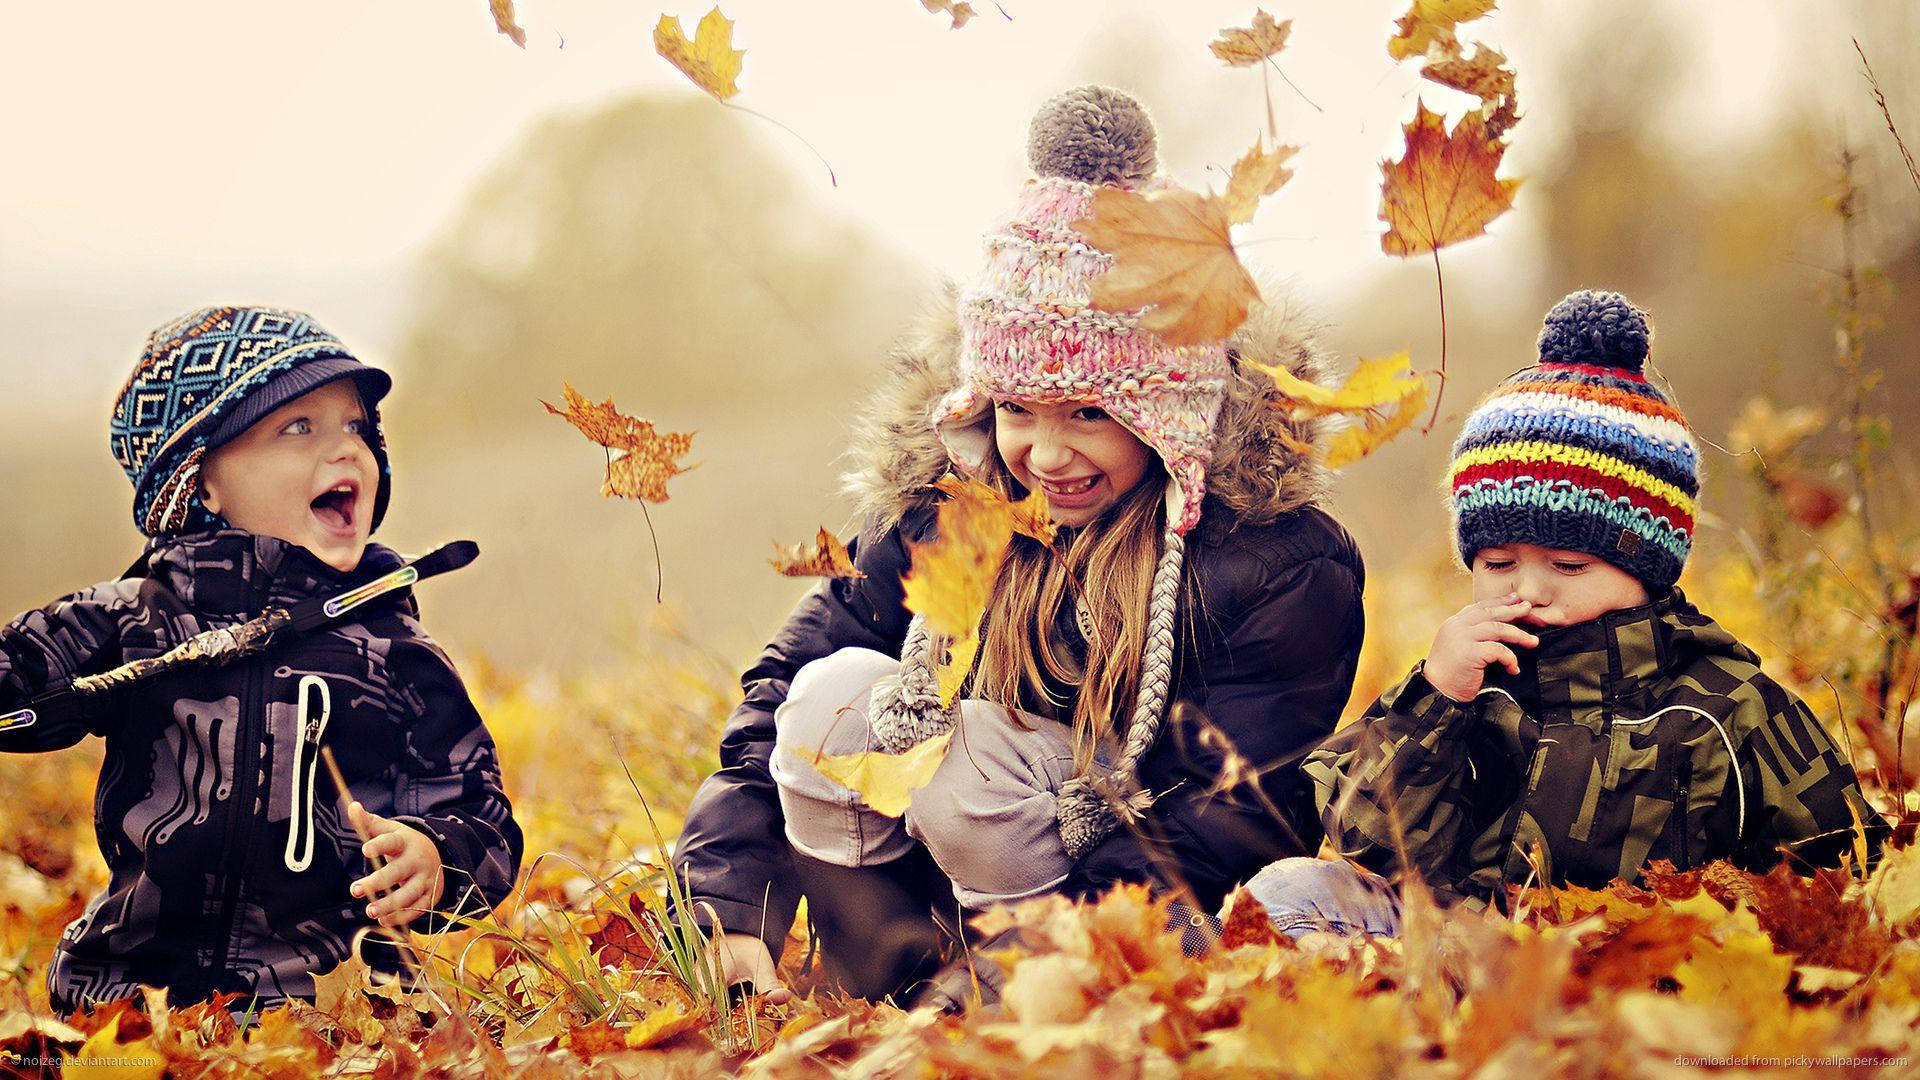 Young People In Autumn wallpaper.